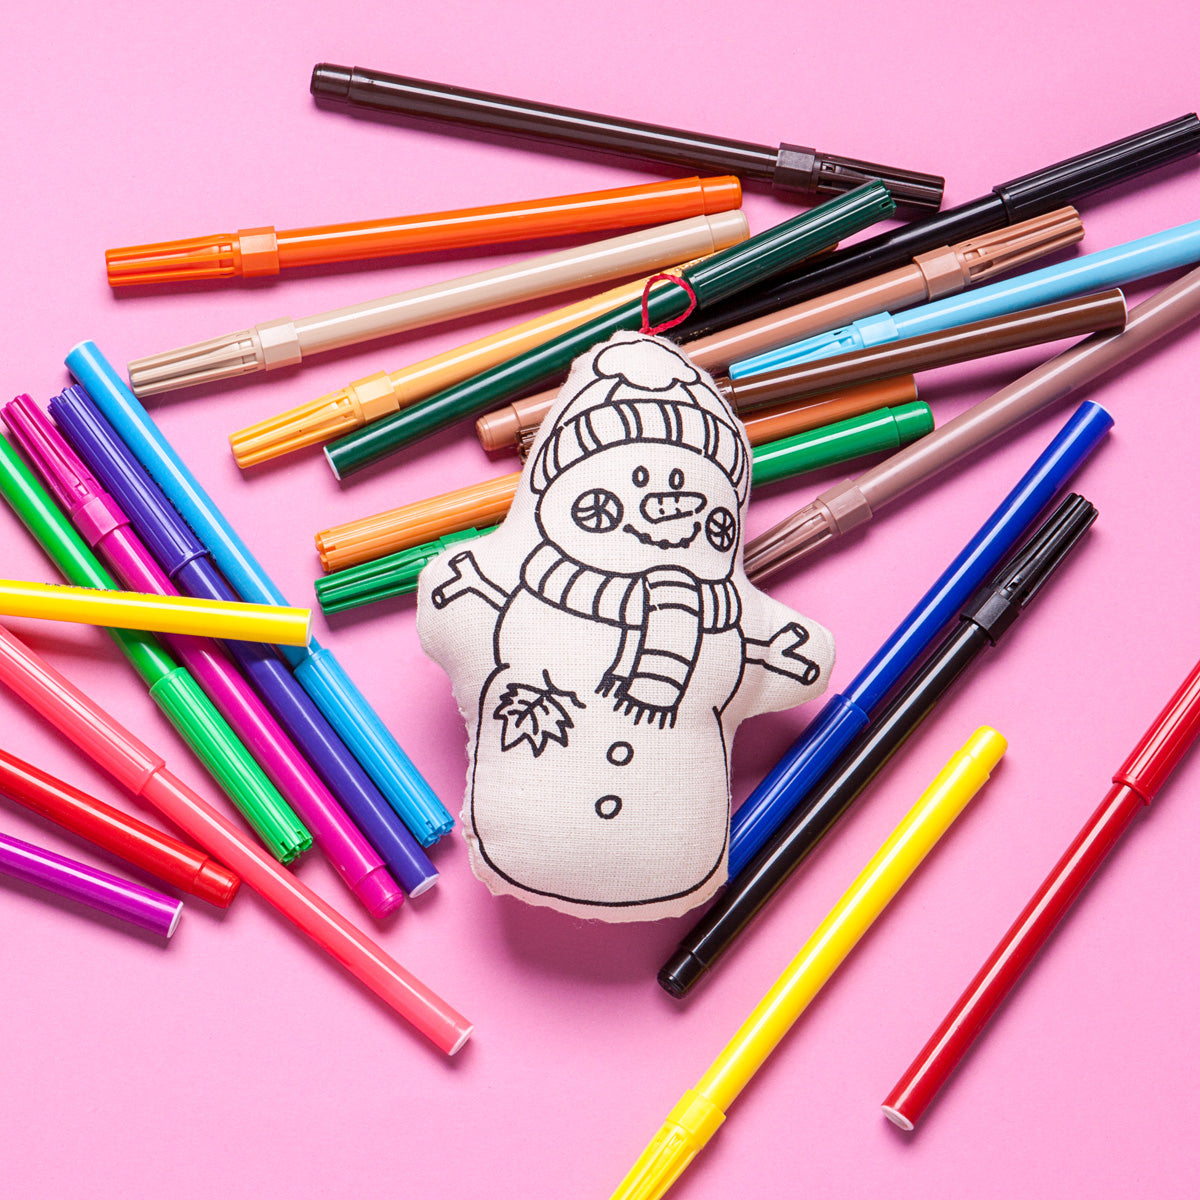 Snowman Christmas Ornament for Colouring